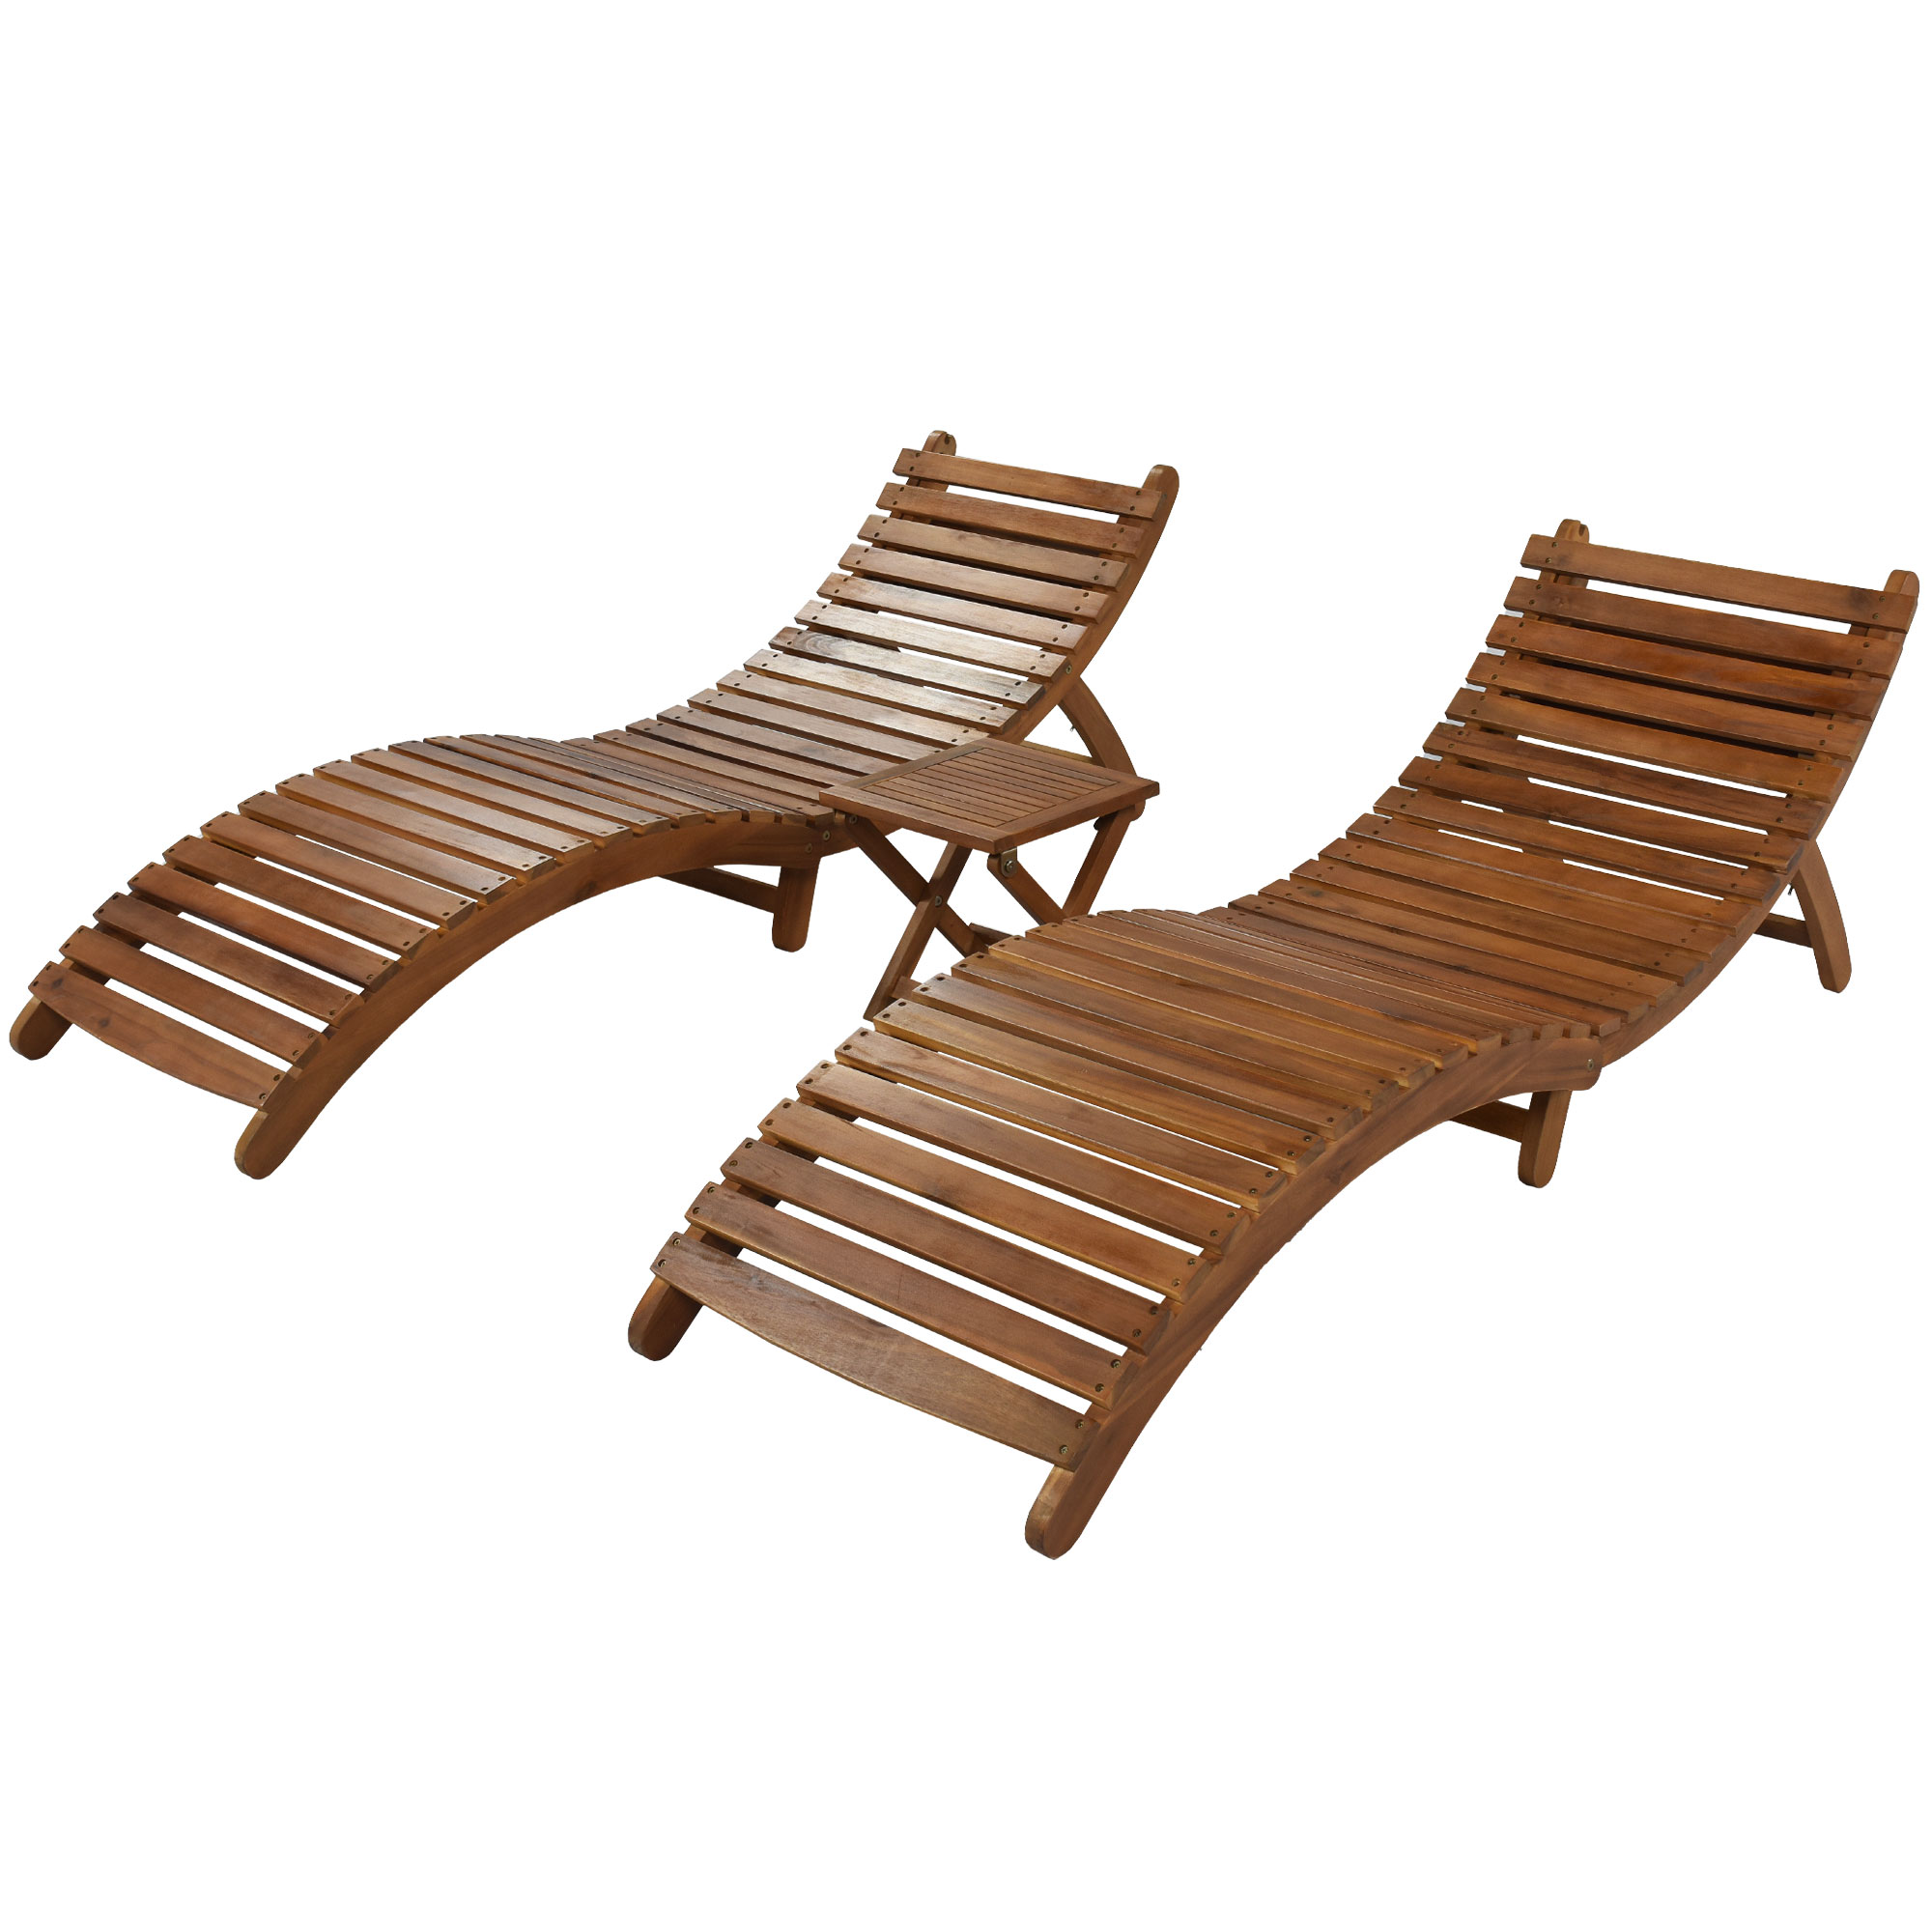 ENYOPRO Patio Lounge Chairs Set of 3, Outdoor Wood Portable Chaise Lounge Chairs with Foldable Tea Table and Cushions, Fit for Pool Porch Backyard Patio, Brown Finish + Dark Gray Cushion, K2702 - image 5 of 8